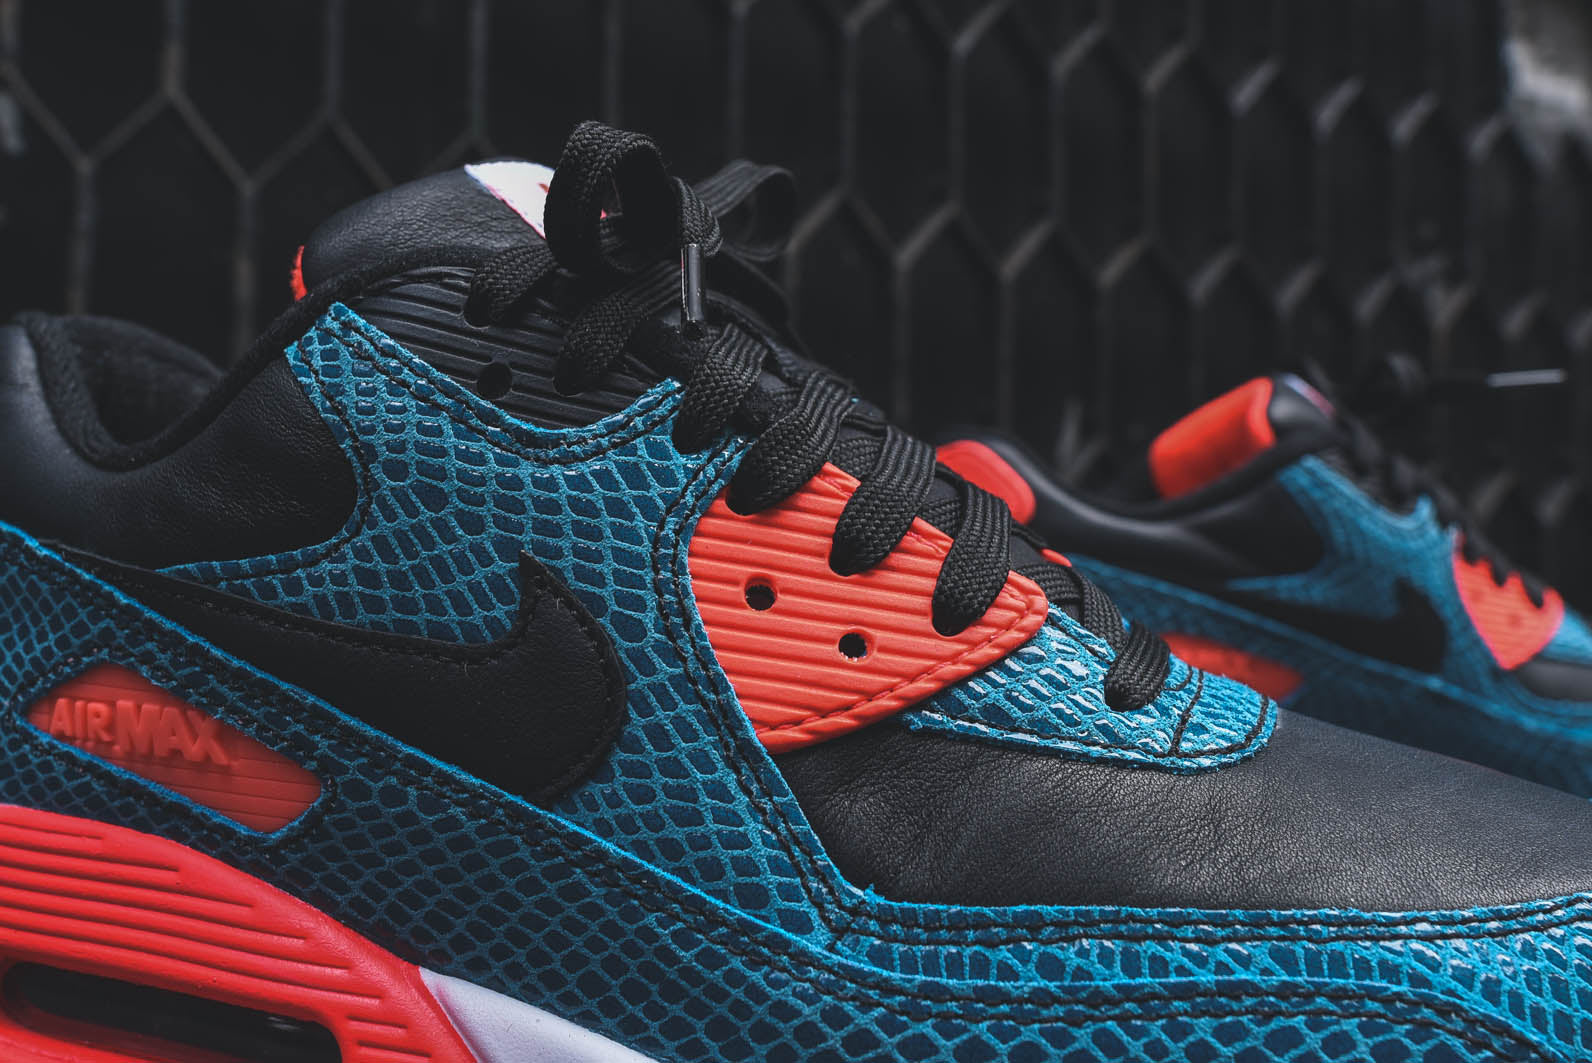 Nike Air Max 90 - Dusty Cactus / Infrared Kith